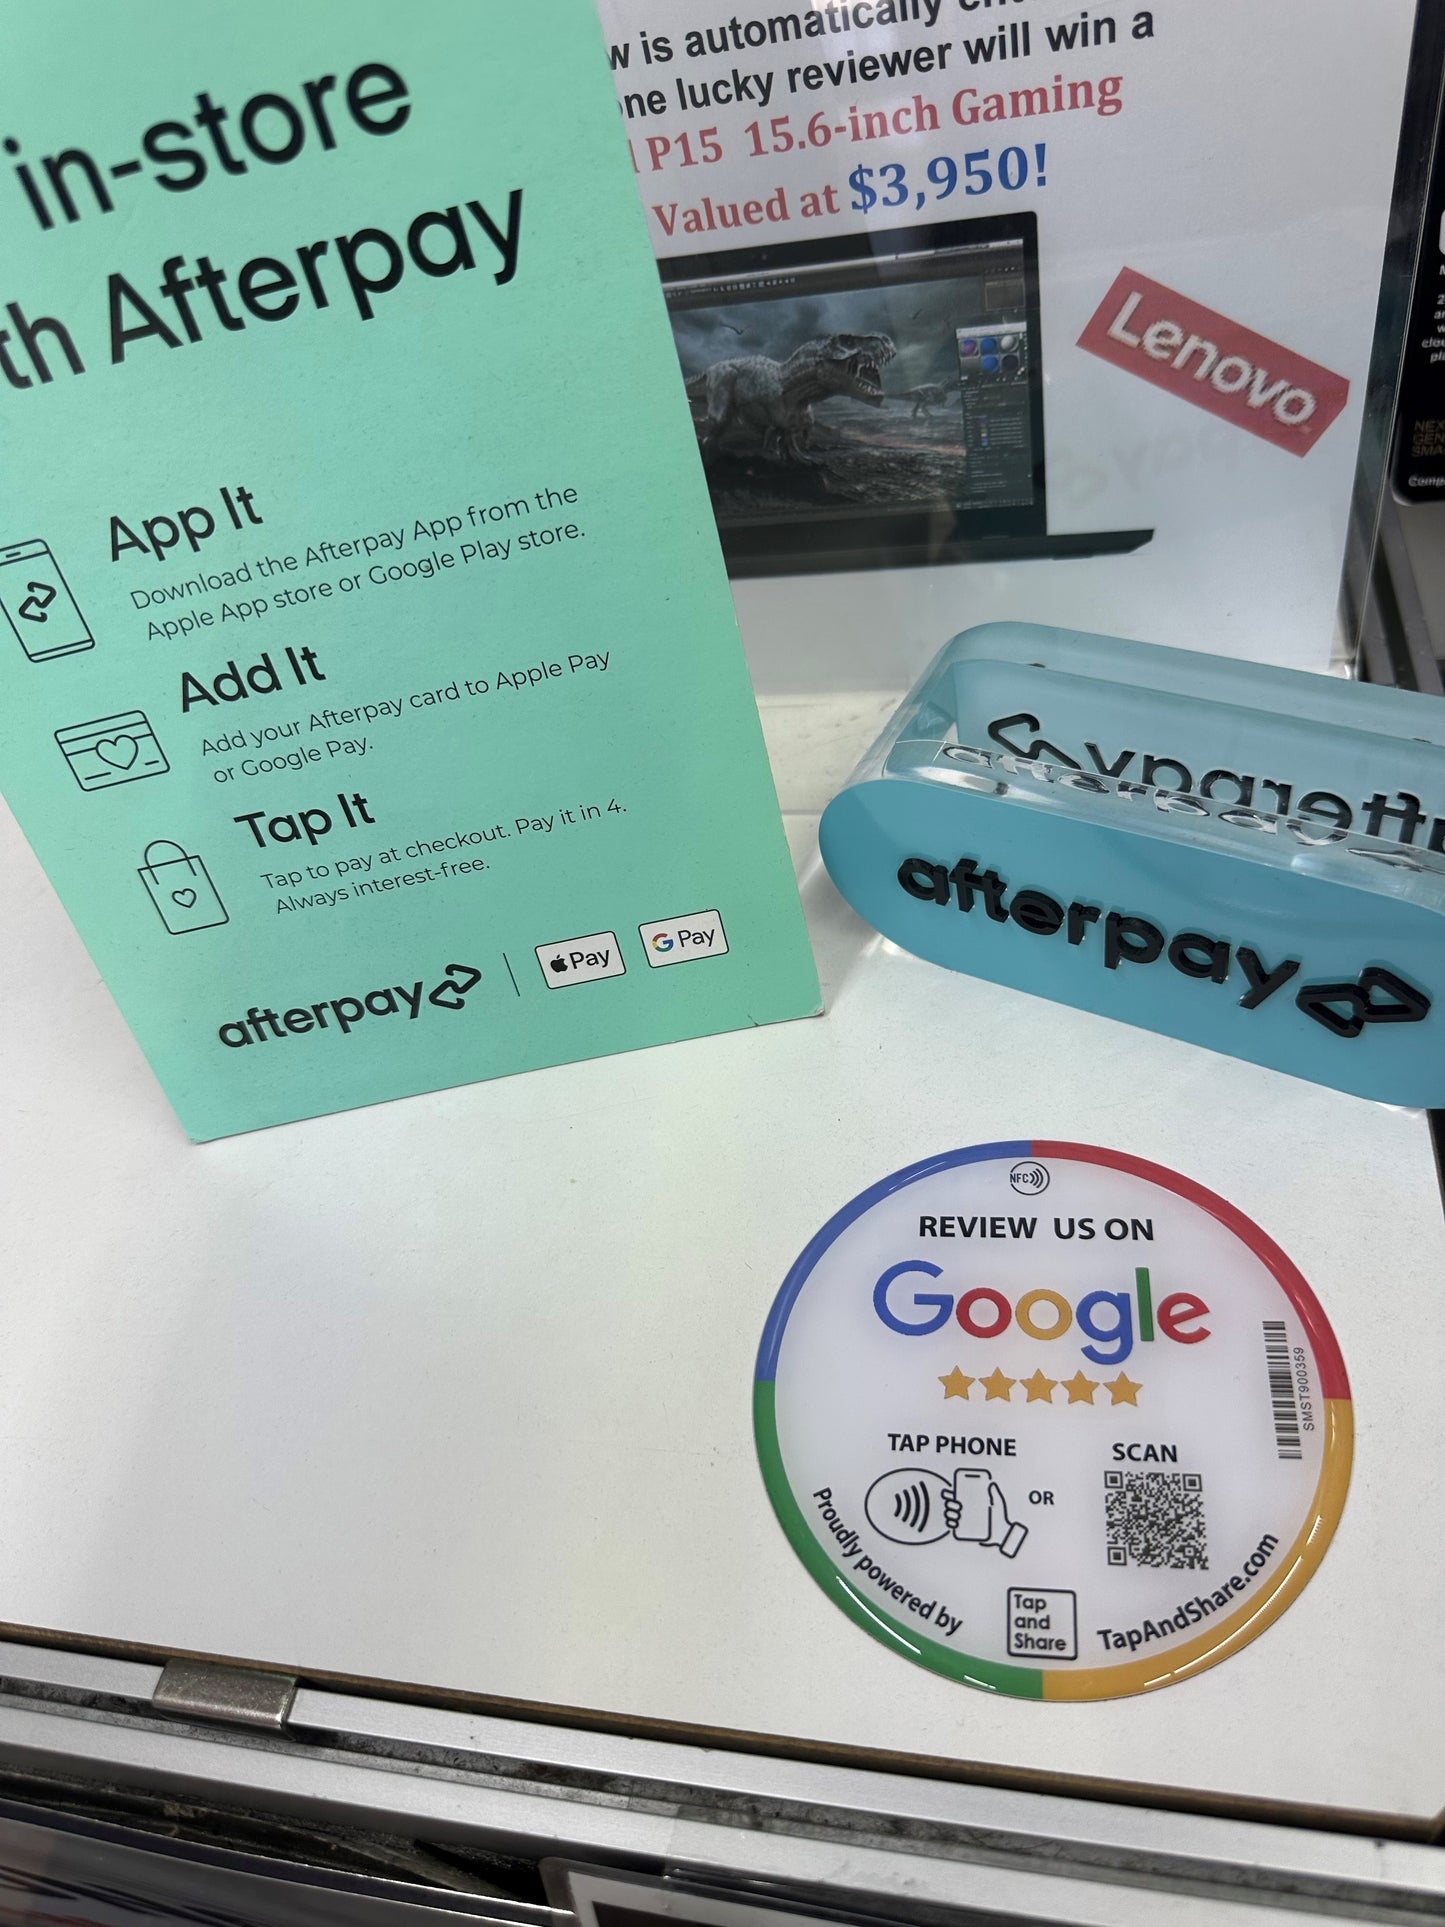 Tap and Share Contactless Sharing Smart NFC 'Review us on Google' Epoxy Sticker + QR code